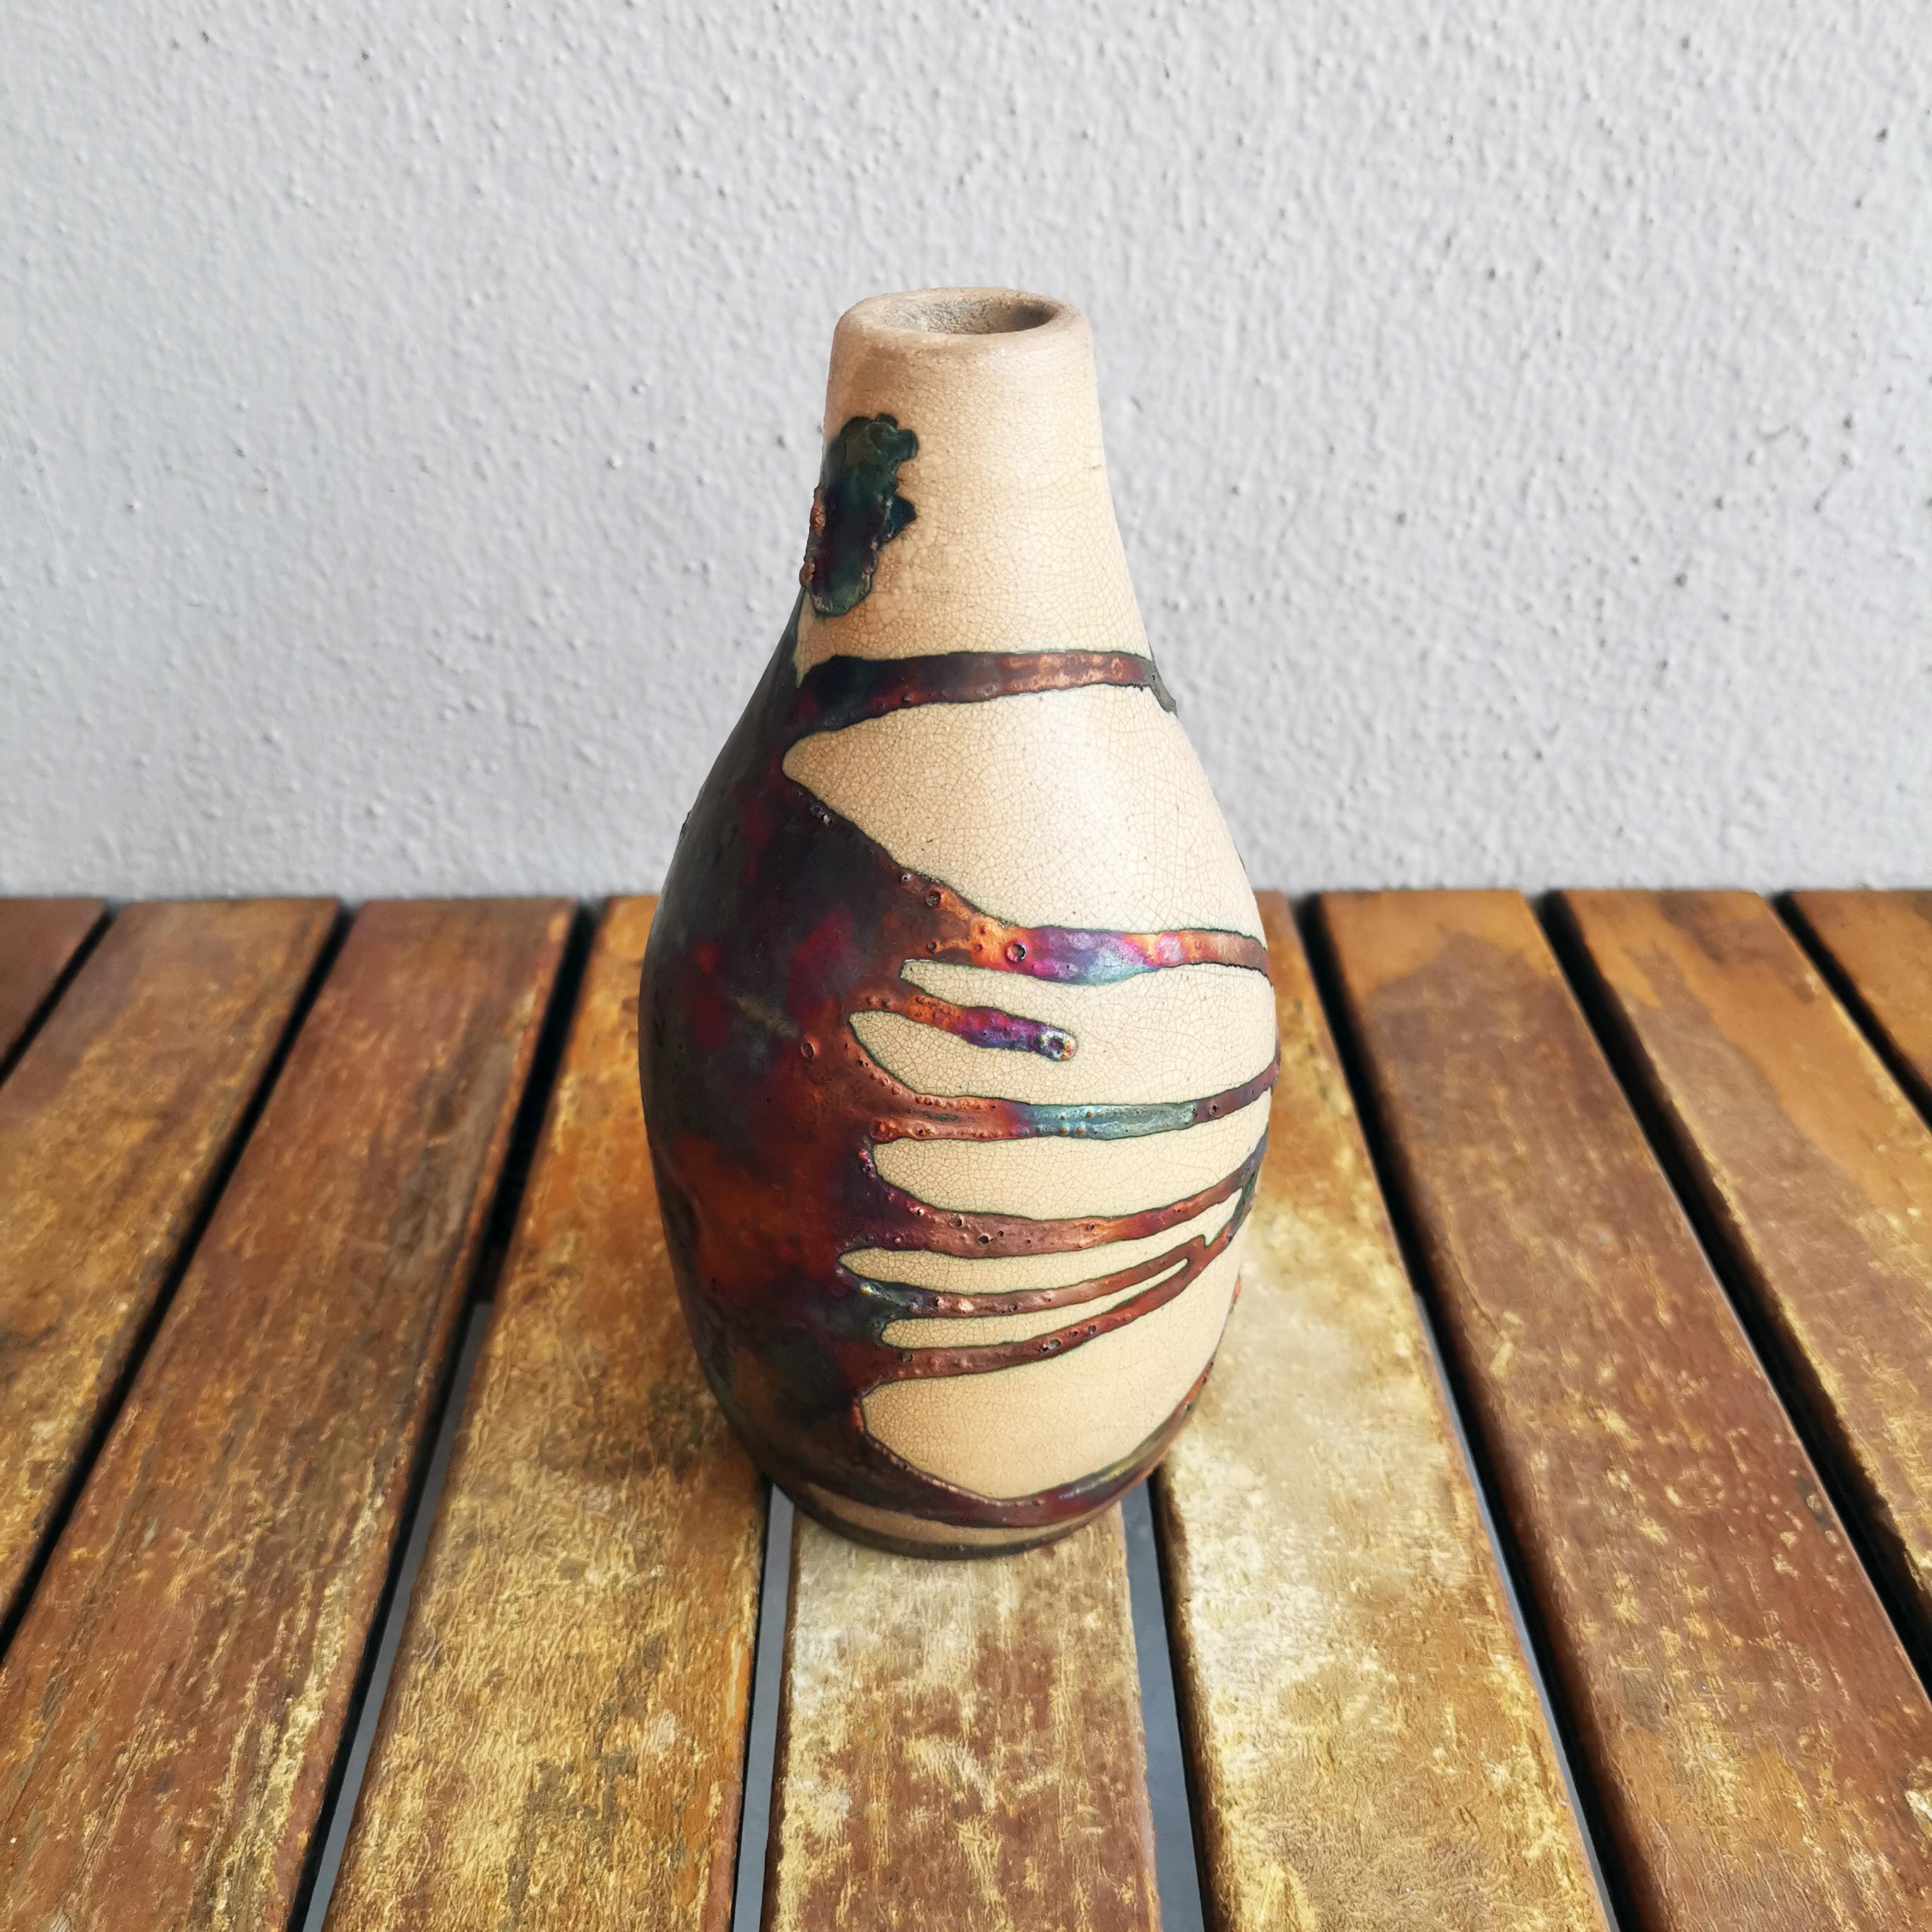 Natsu ( 夏 ) ~ (n) summer

Our Natsu vase is shaped almost like a soda bottle, evoking memories of summertime when it’s hot and all you would love to drink is ice-cold lemonade.

This piece would fit in very well with our Tsuri vase, Koban vase, Koi